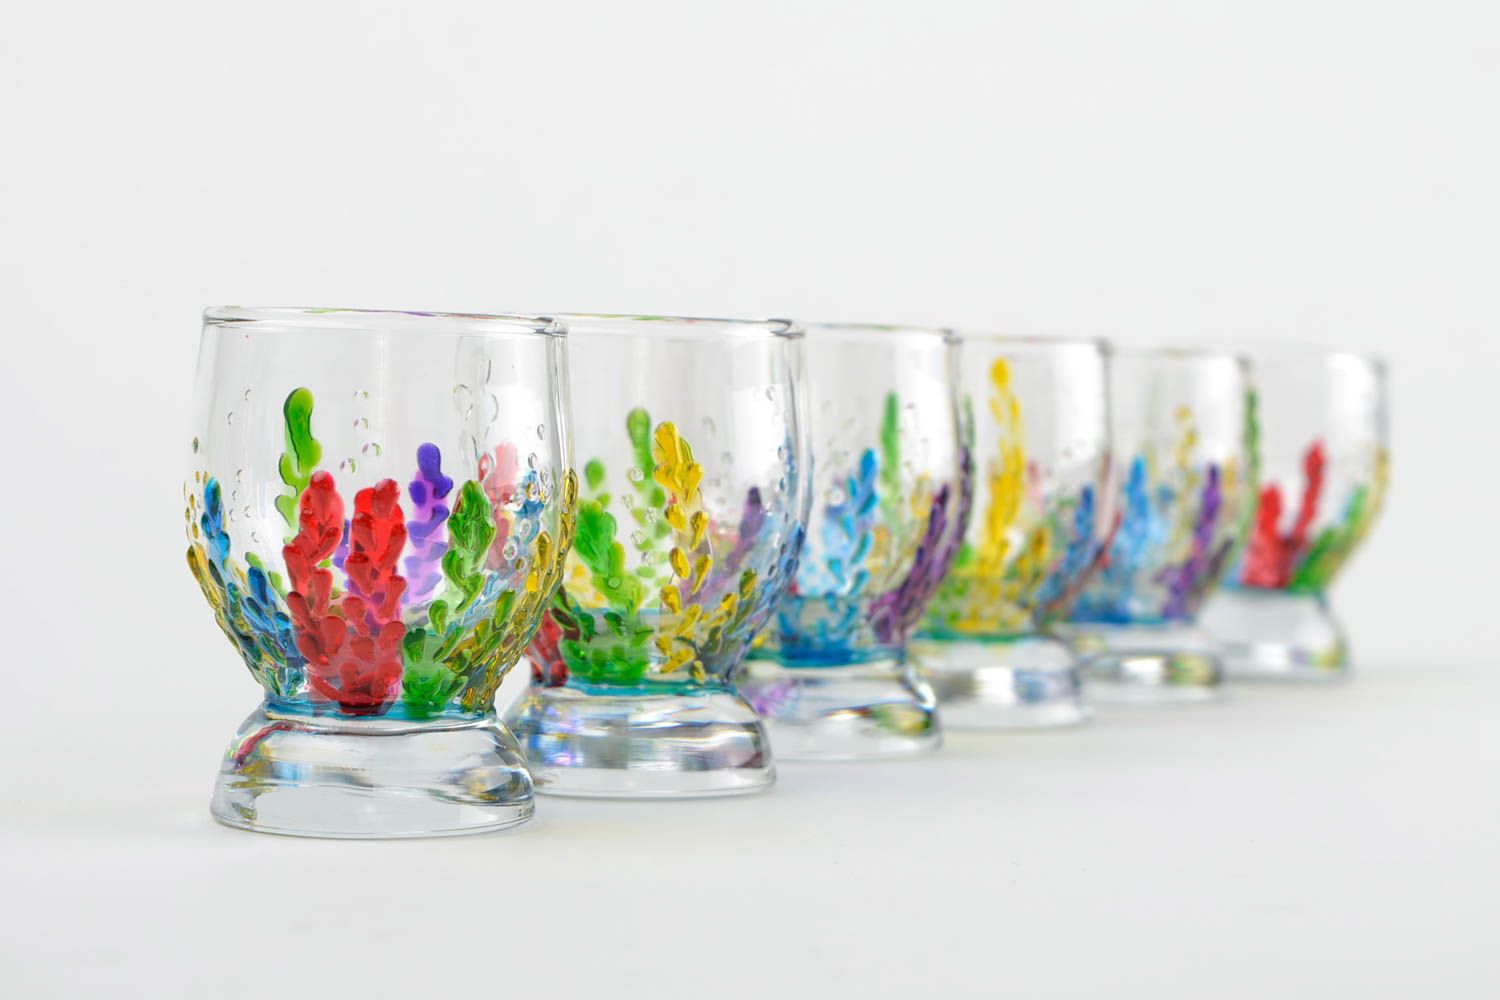 Unusual handmade shot glass shot glasses set 6 pieces painted glass gift ideas photo 1